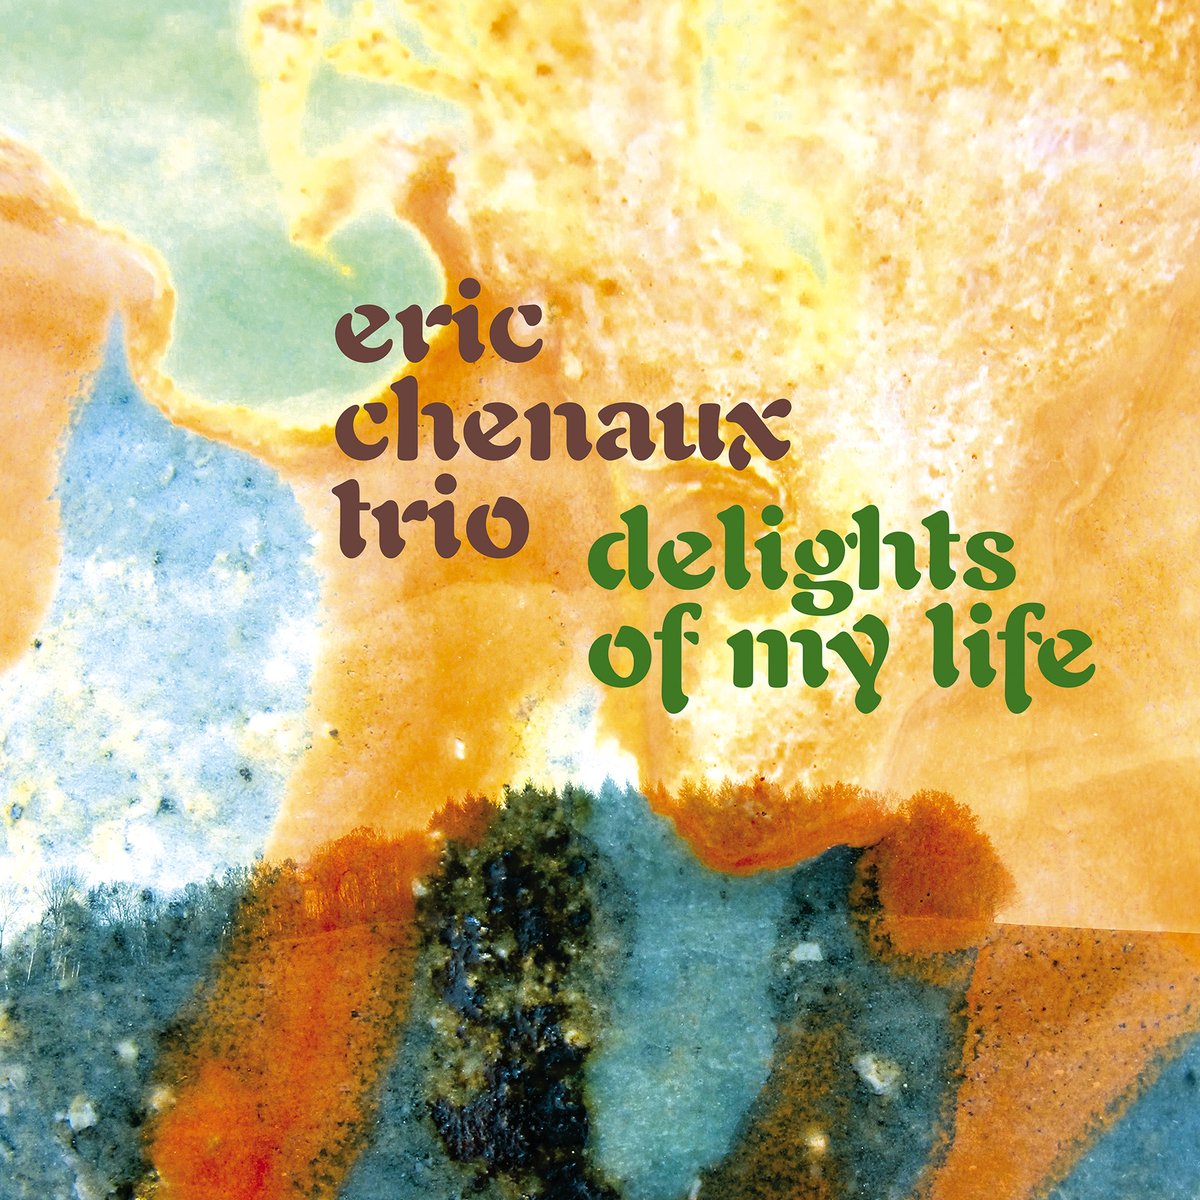 Delights Of My Life by Eric Chenaux Trio is Constellation's next release of 2024. This is a new chapter in Eric Chenaux’s trajectory of iconoclastic and virtuosic music, one where he is joined by Philippe Melanson and longtime collaborator Ryan Driver. lnk.to/cst179